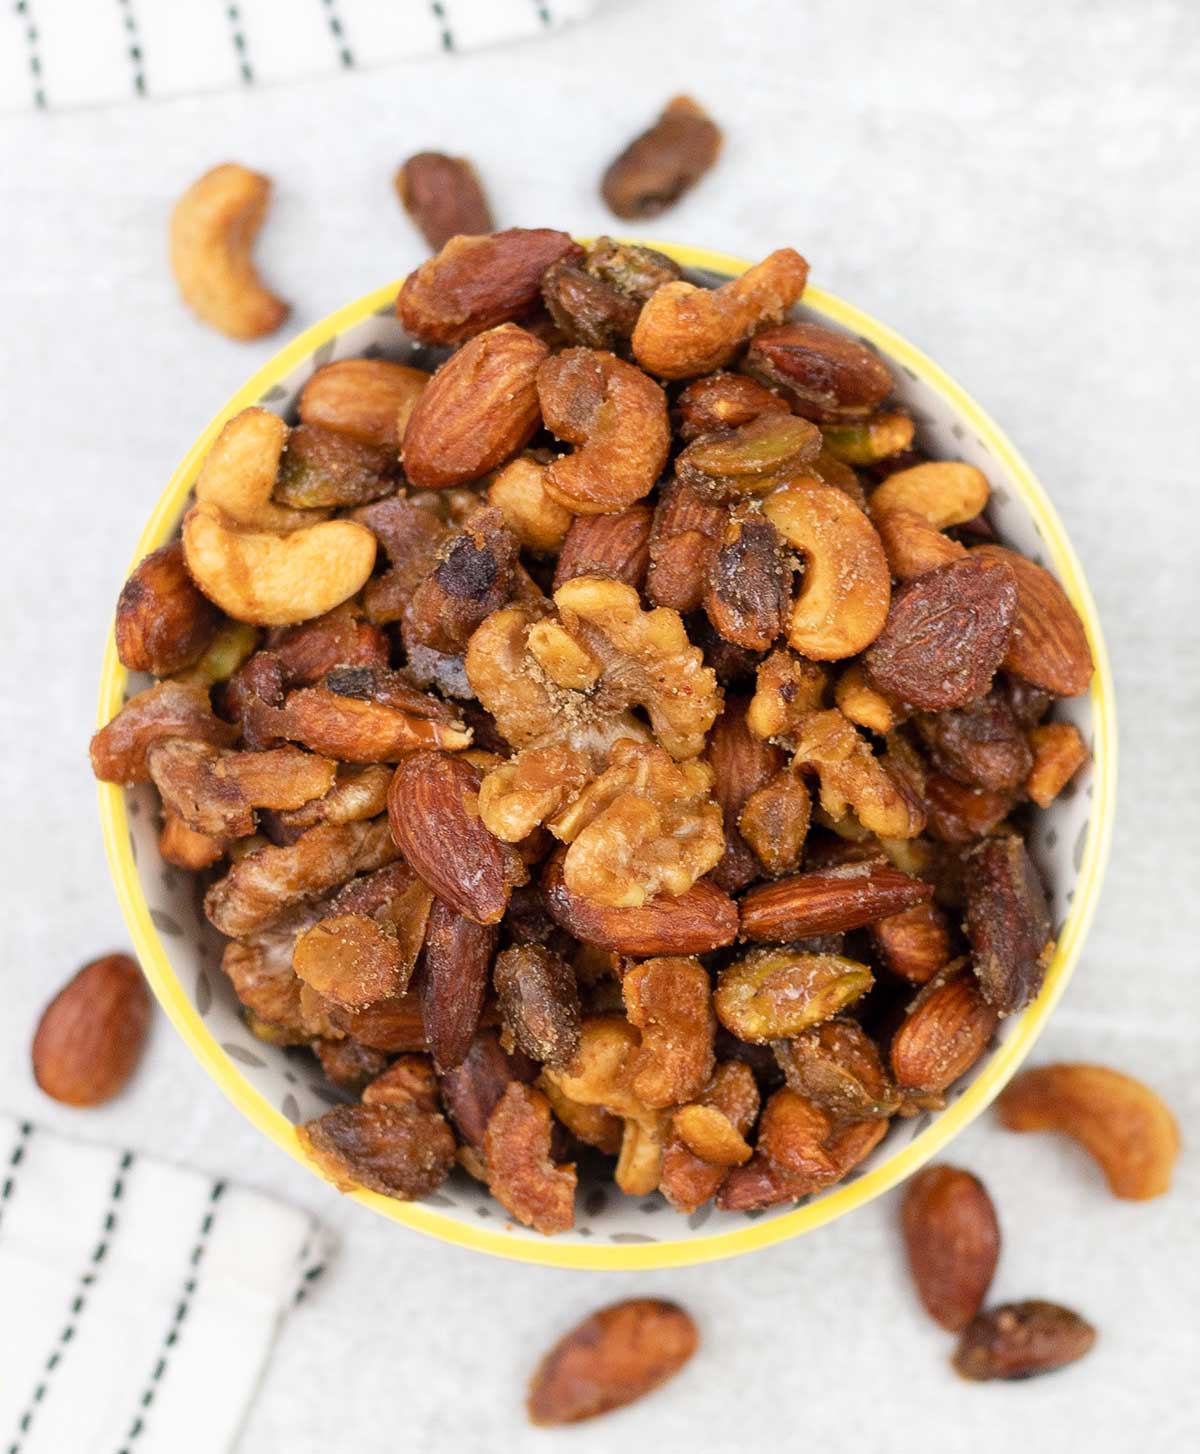 Honey Roasted Mixed Nuts in a bowl.